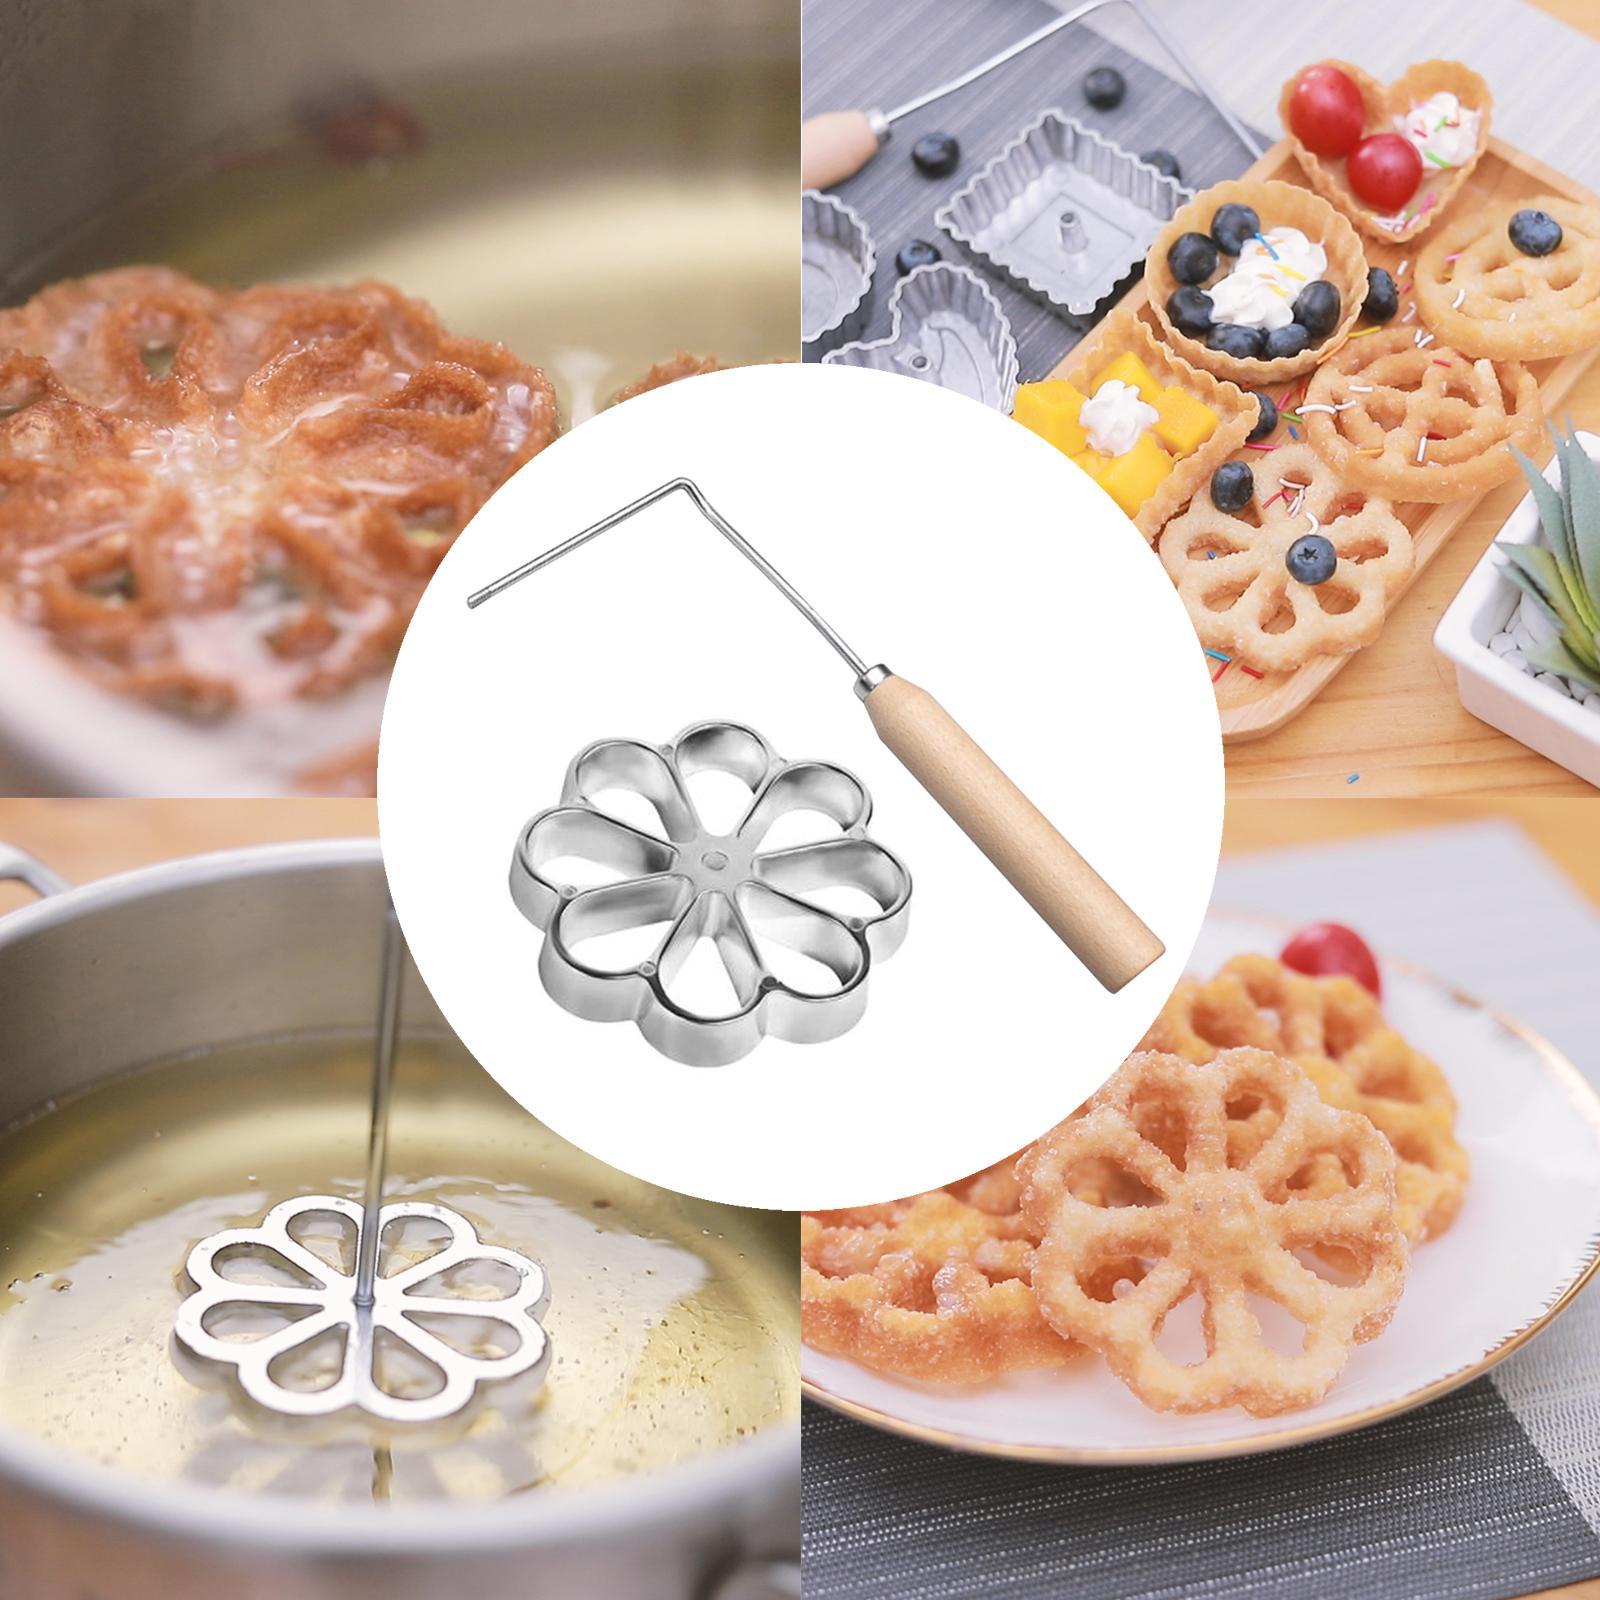 Rosette Iron Set Maker  With Handle Waffle Timbale Molds